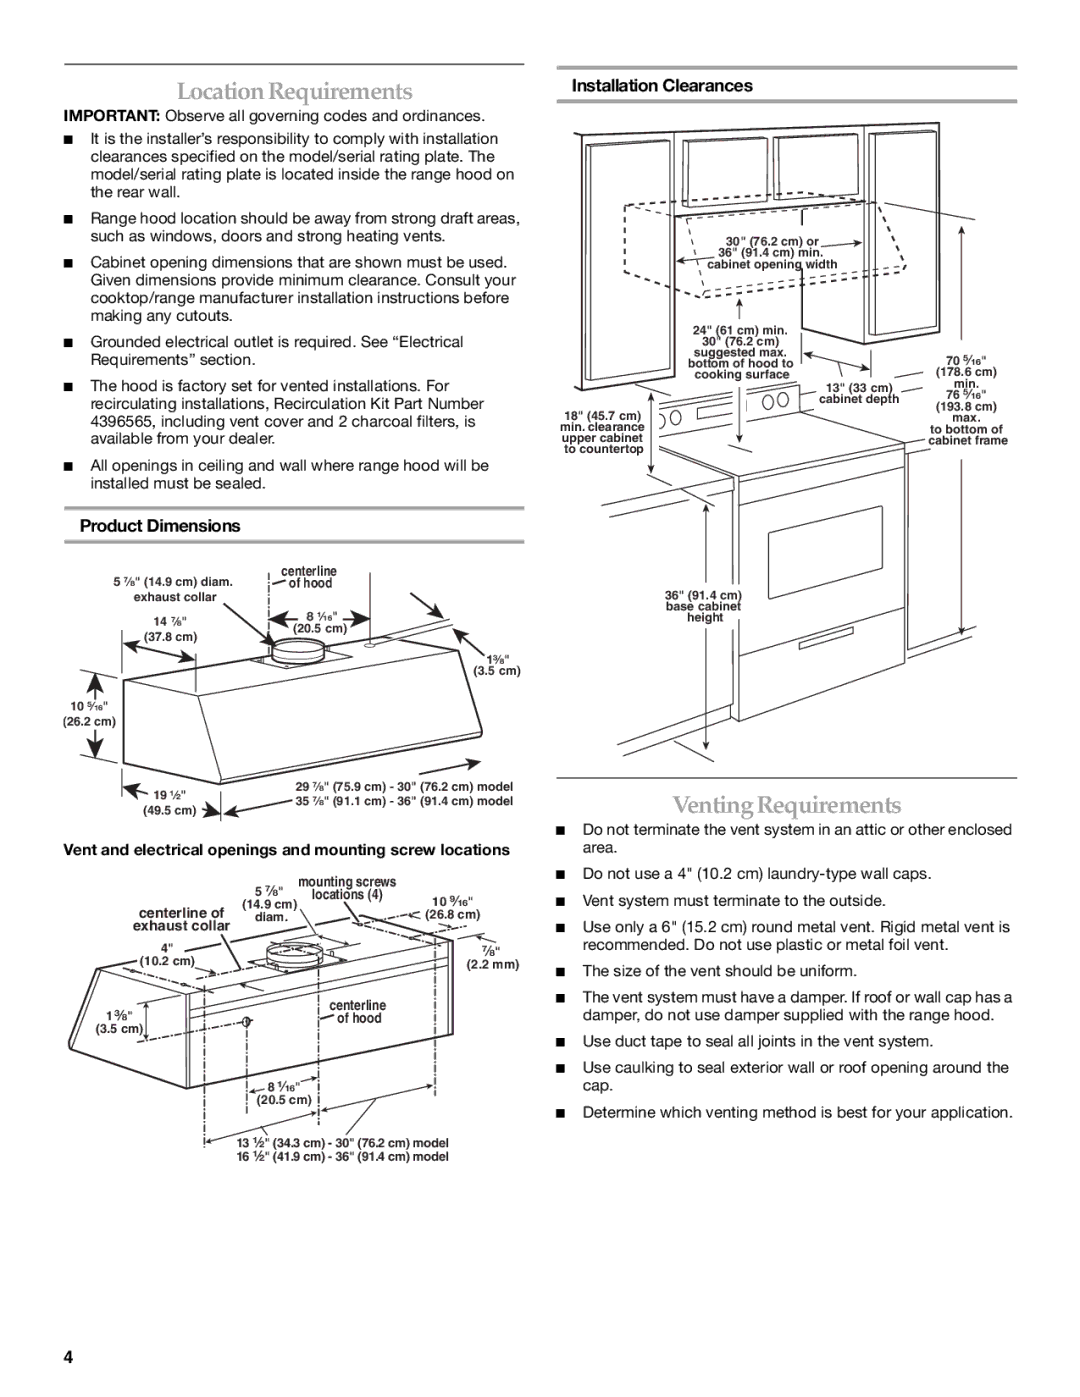 KitchenAid RangeHood Location Requirements, Venting Requirements, Installation Clearances, Product Dimensions 